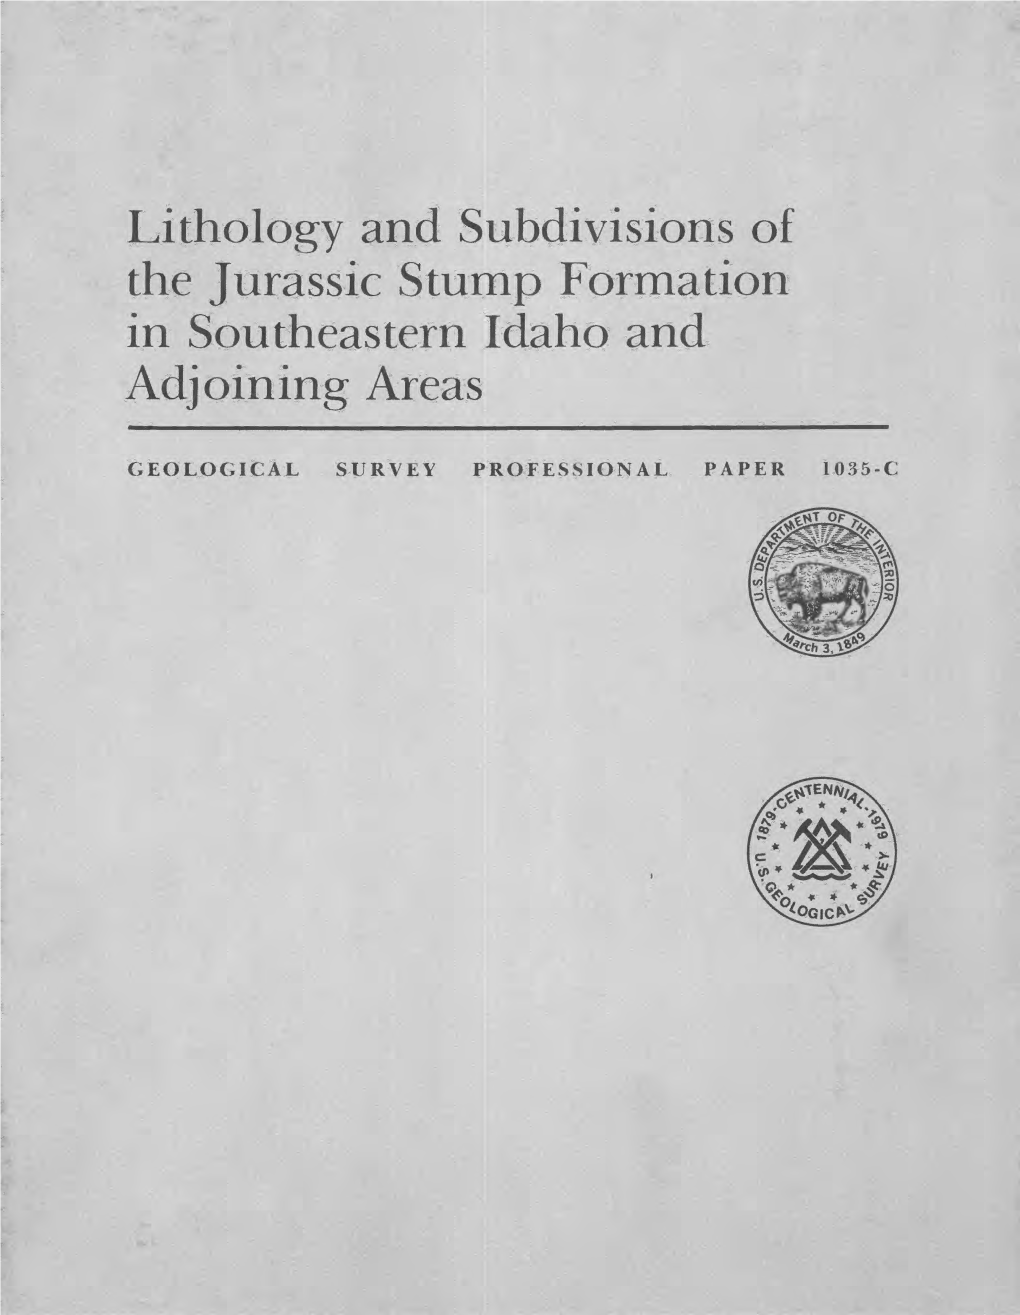 Lithology and Subdivisions of the Jurassic Stump Formation in Southeastern Idaho and Adjoining Areas